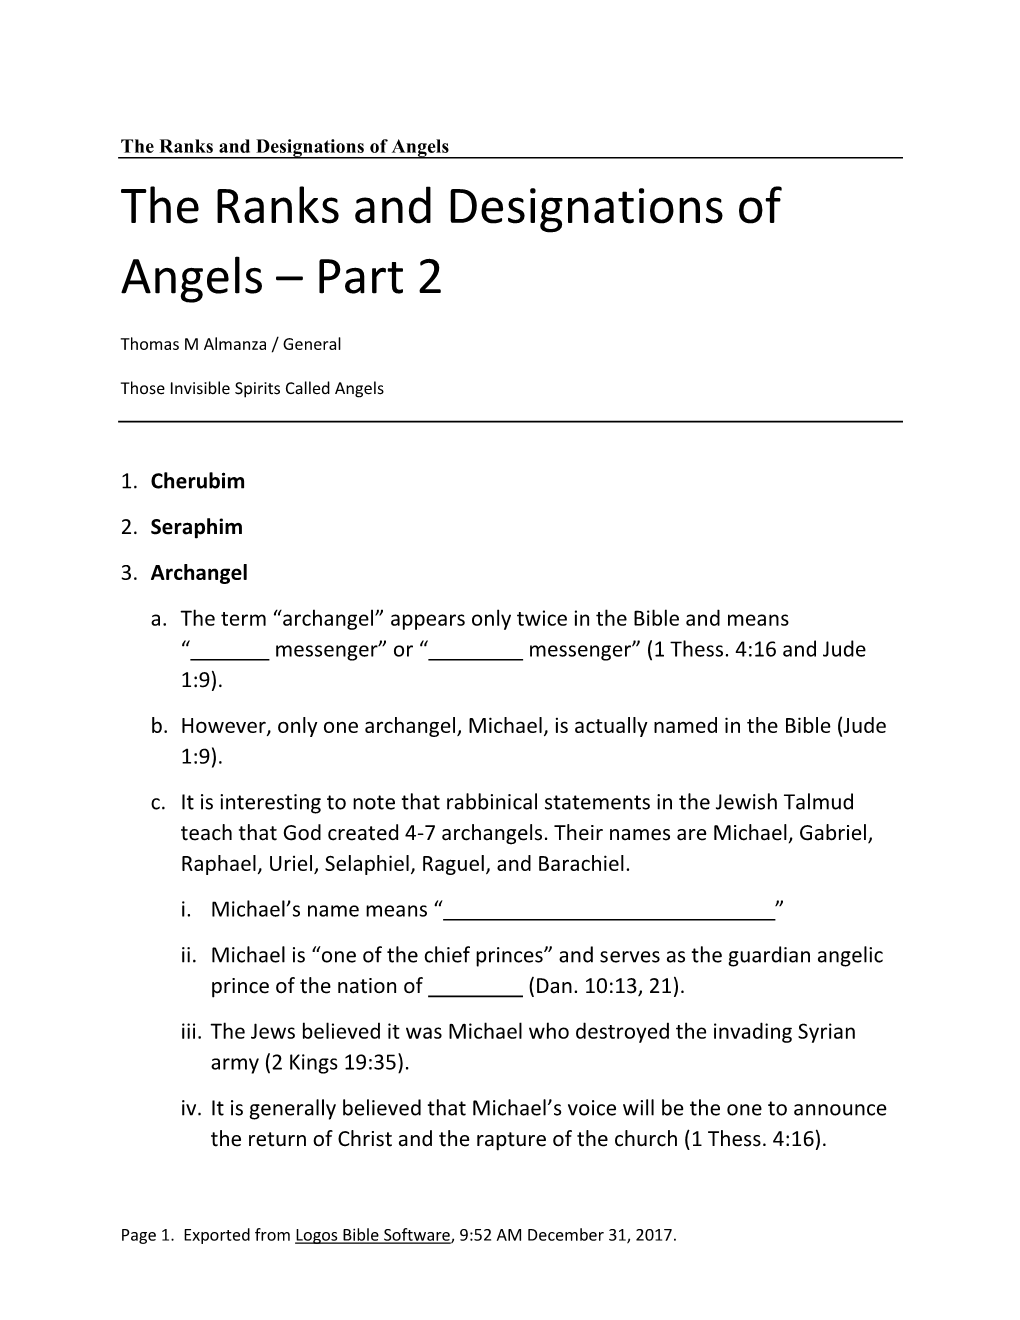 The Ranks and Designations of Angels the Ranks and Designations Of